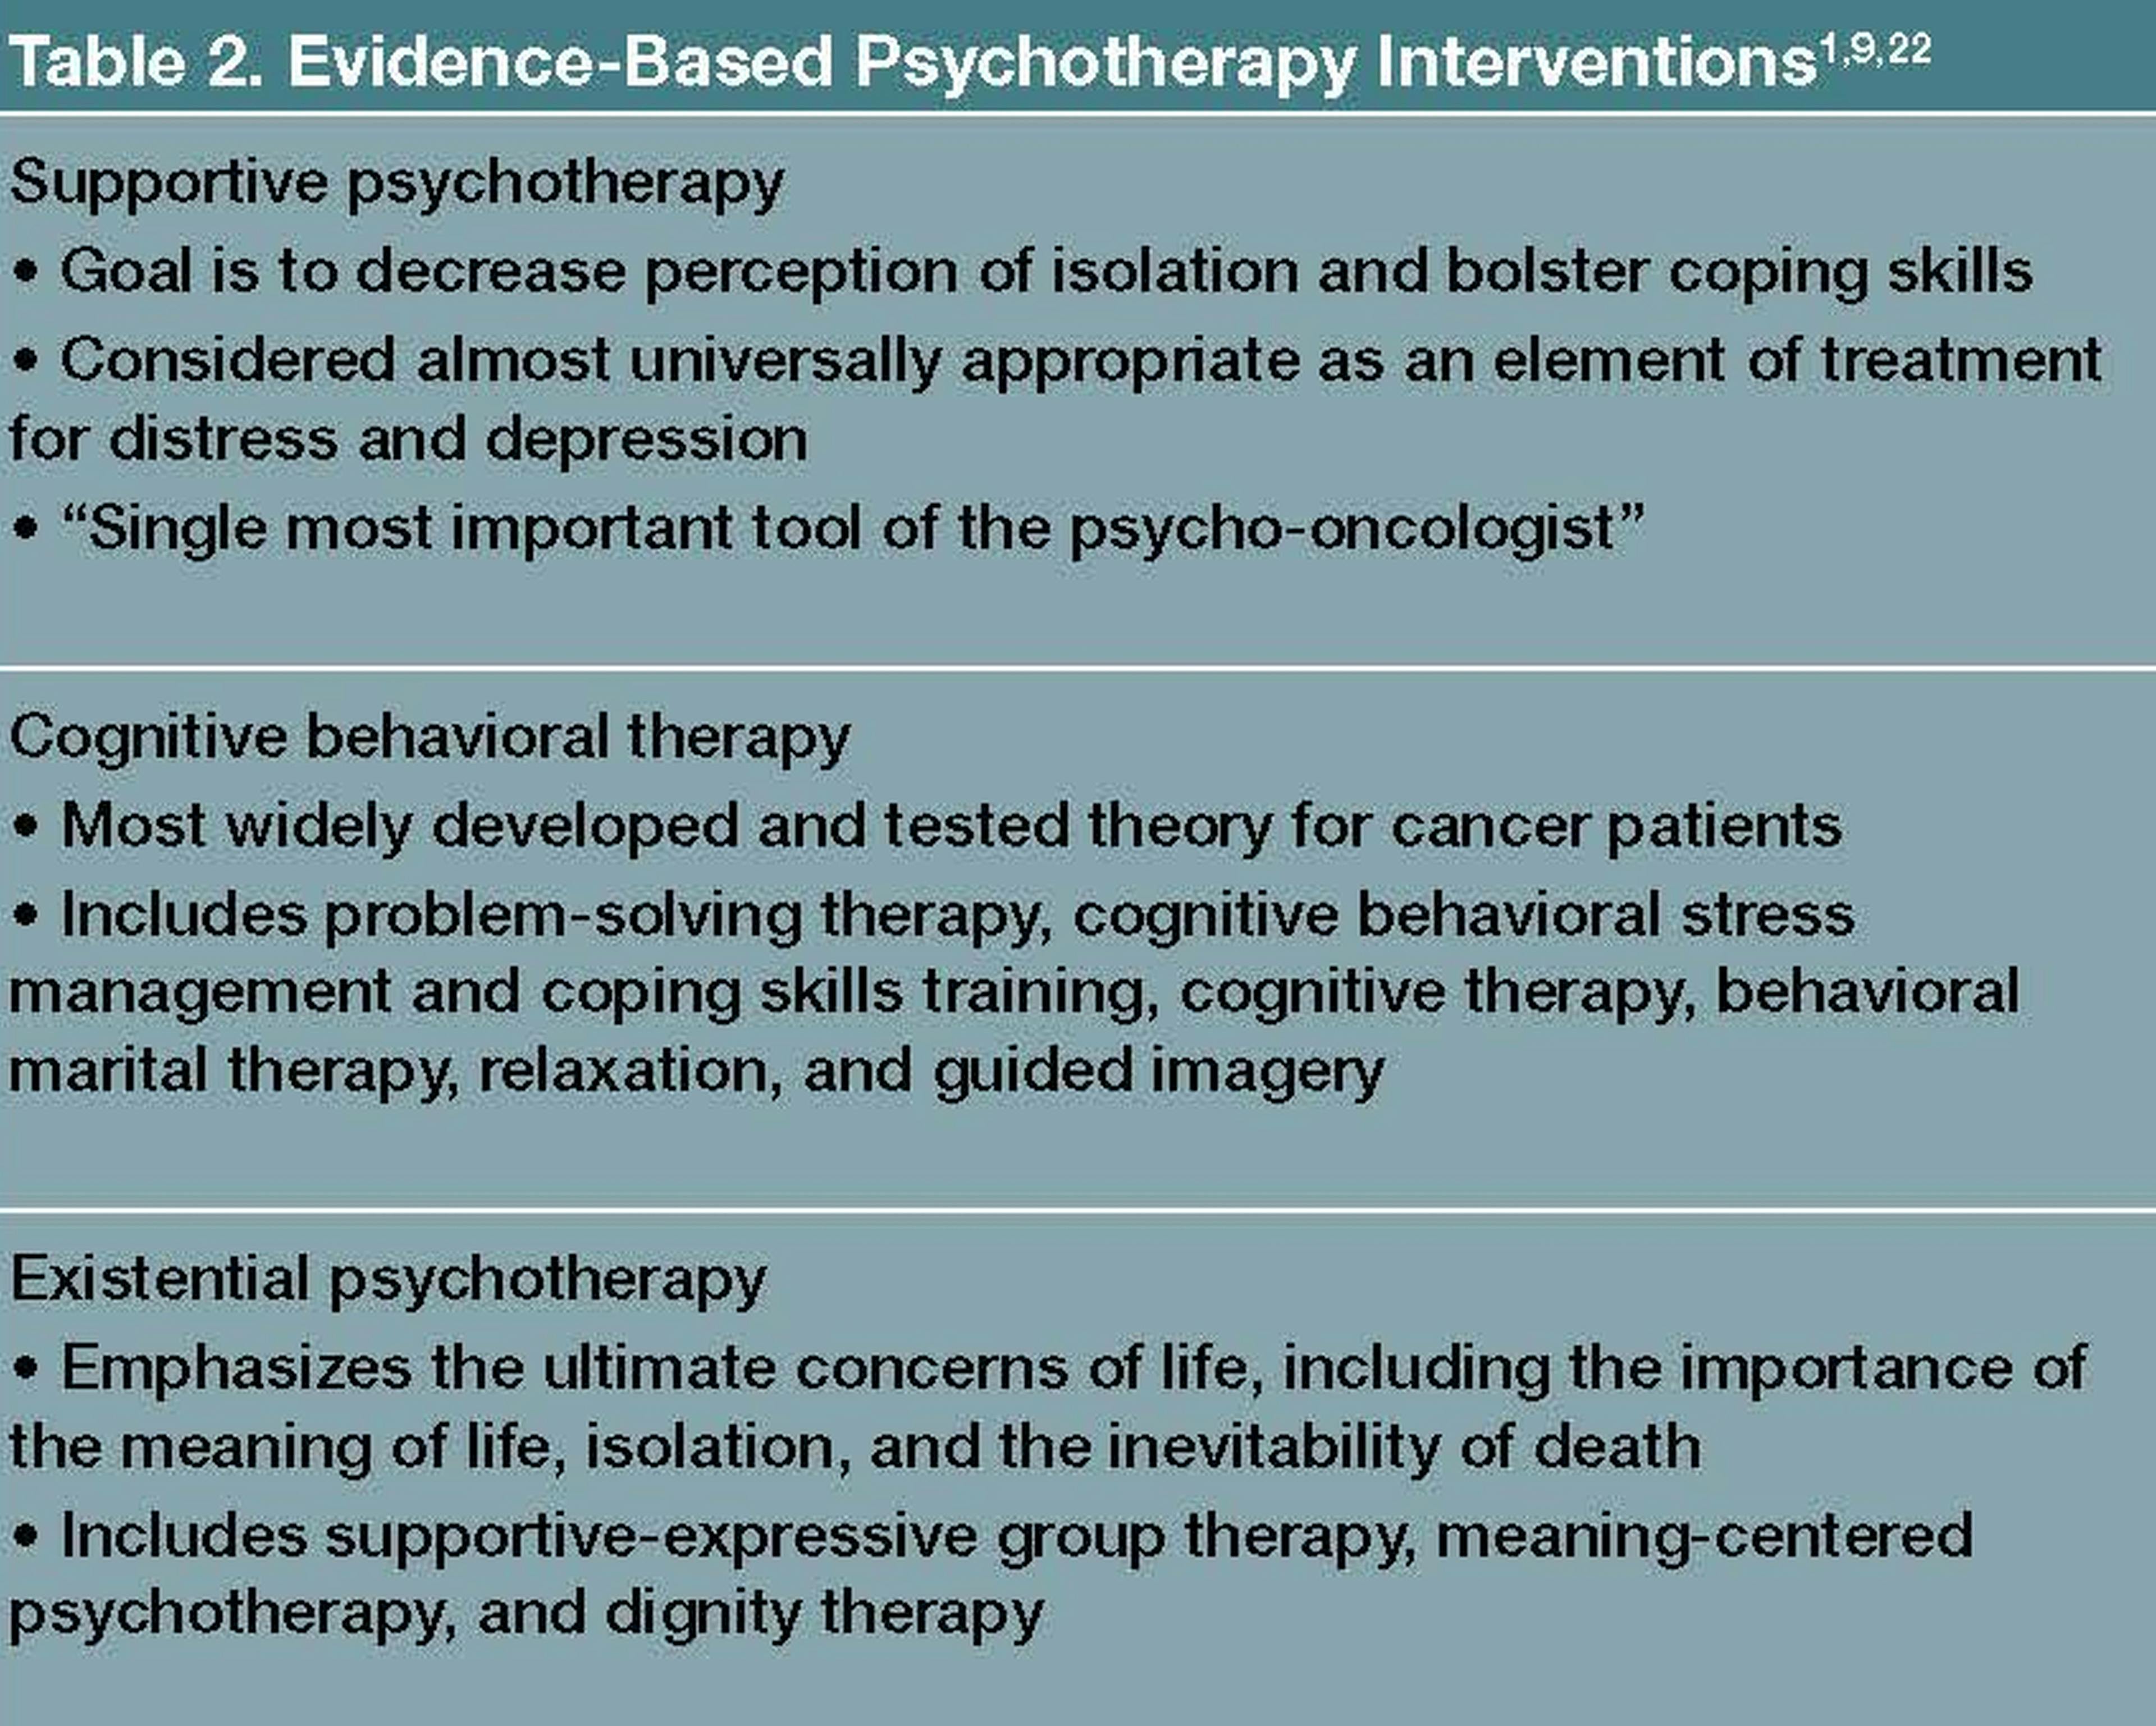 Evidence-Based Psychotherapy Interventions